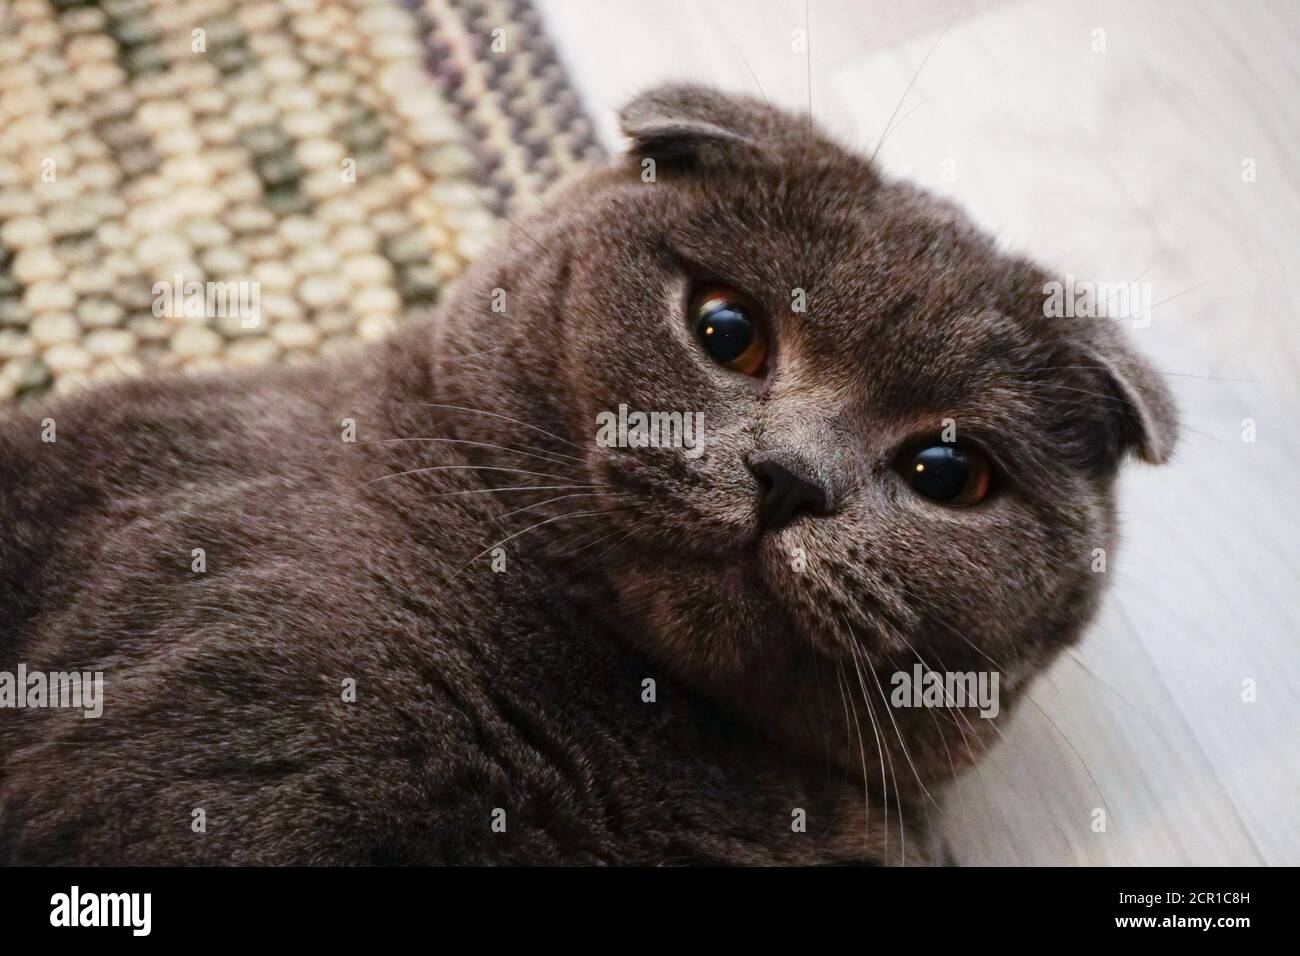 Cute scottish fold cat with amber eyes looking at camera Stock Photo